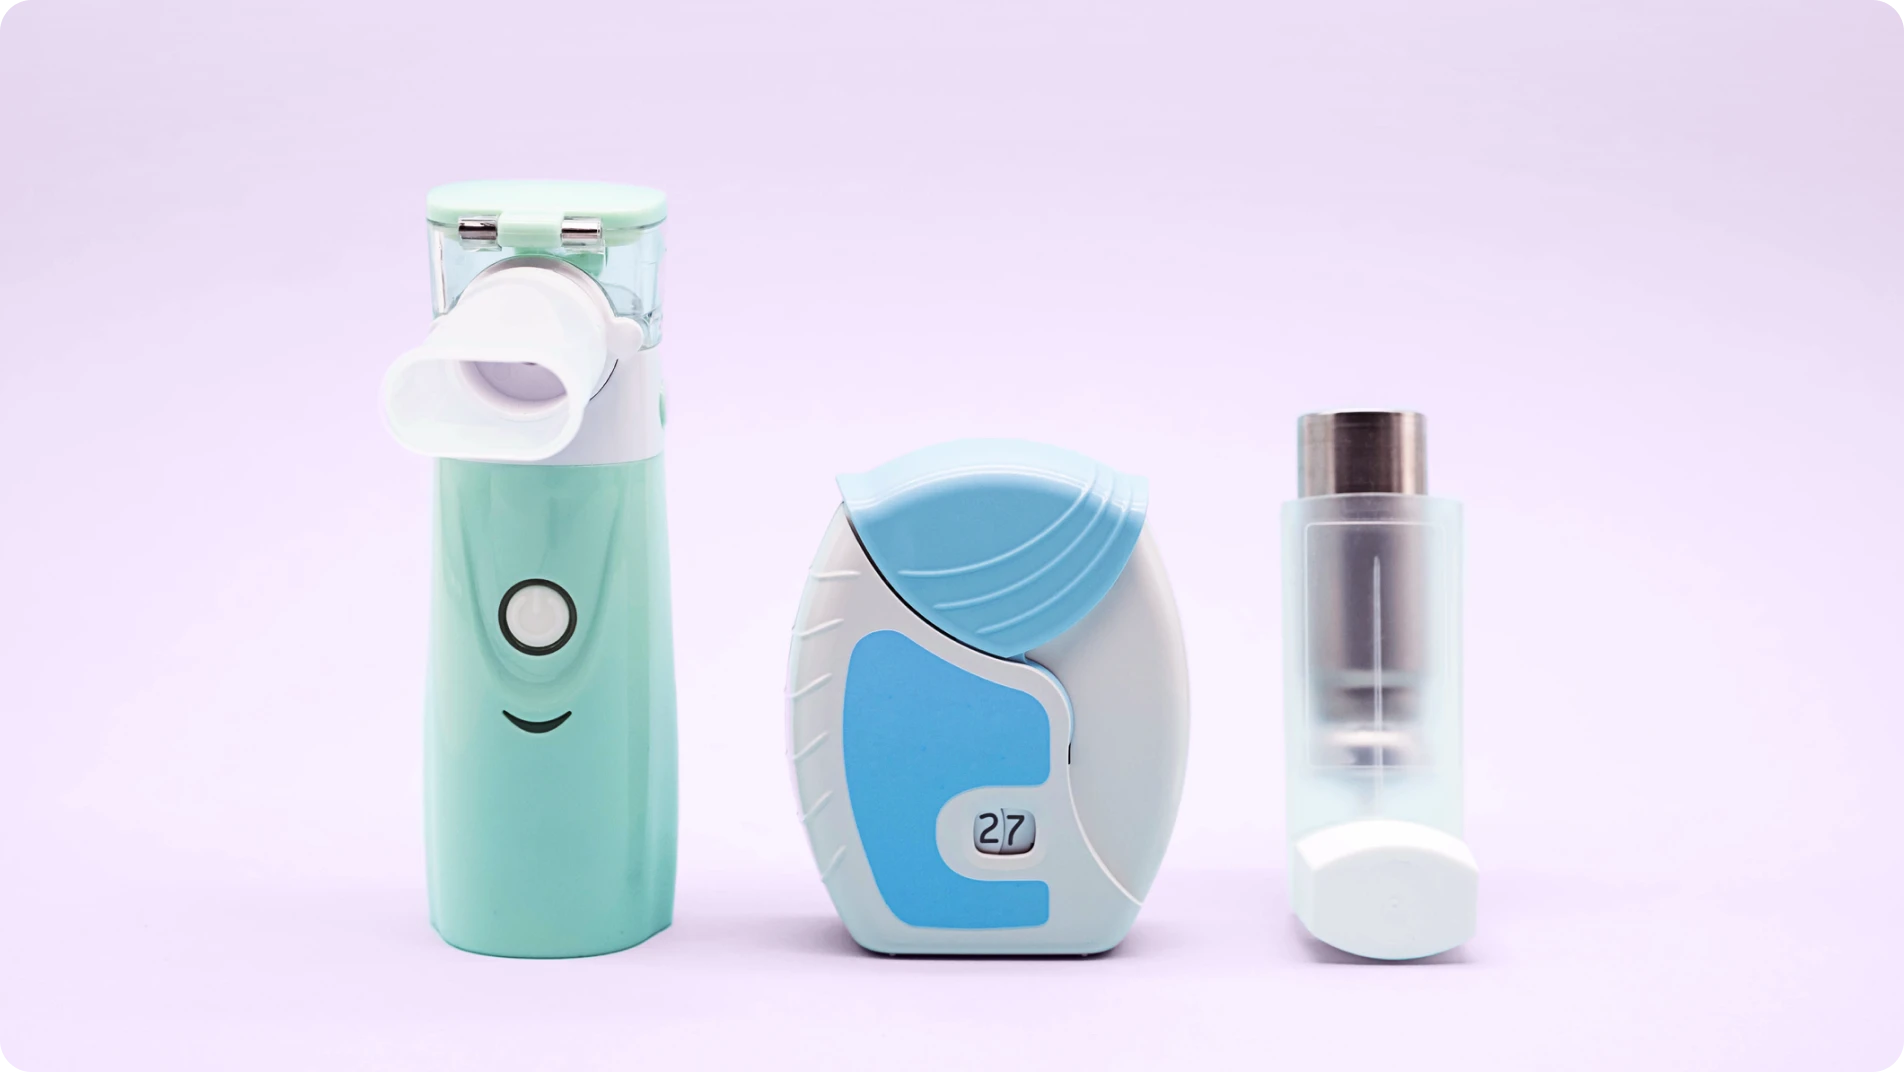 inhaler types, including aerosol inhalers (such as MDIs, BAIs, and SMIs) and dry powder inhalers (such as DPIs and MDPIs)